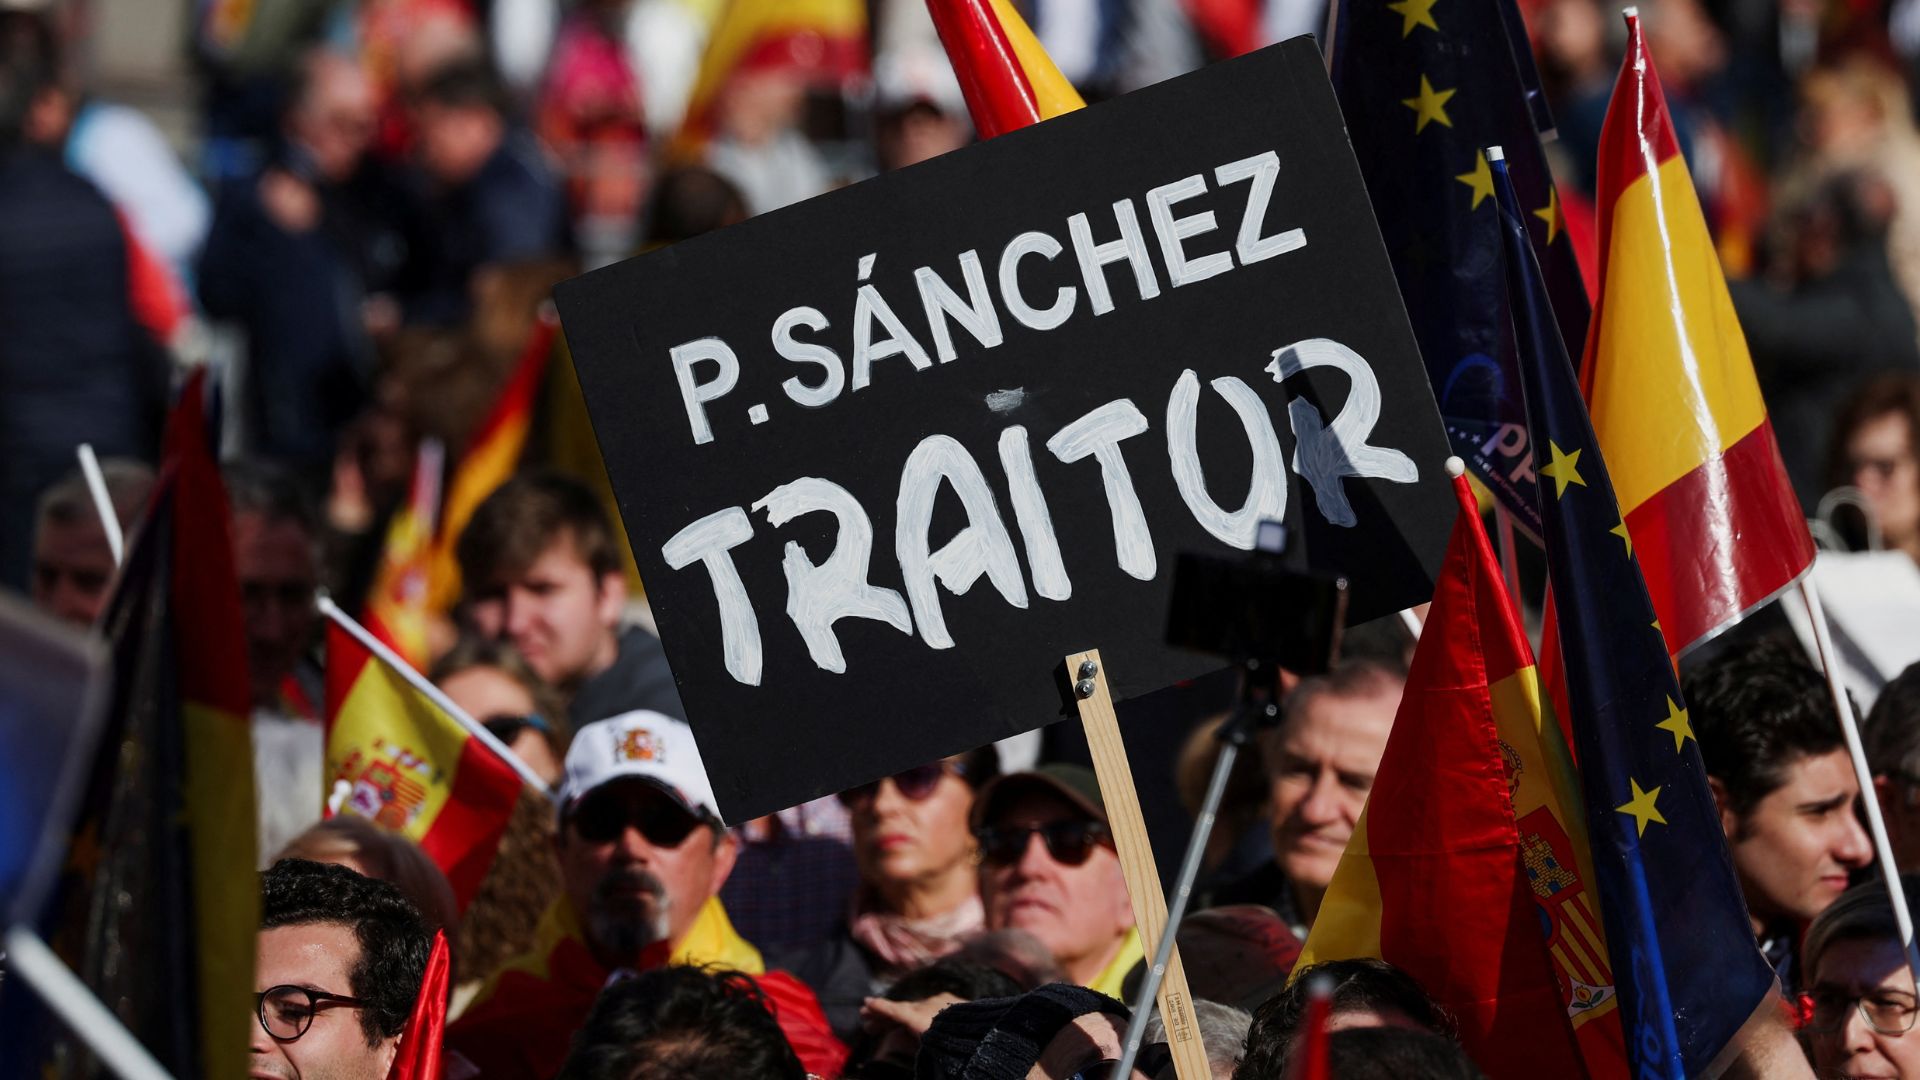 A protester holds a placard that calls Pedro Sanchez a 'traitor' during a demonstration in Madrid in January. /Isabel Infantes/Reuters